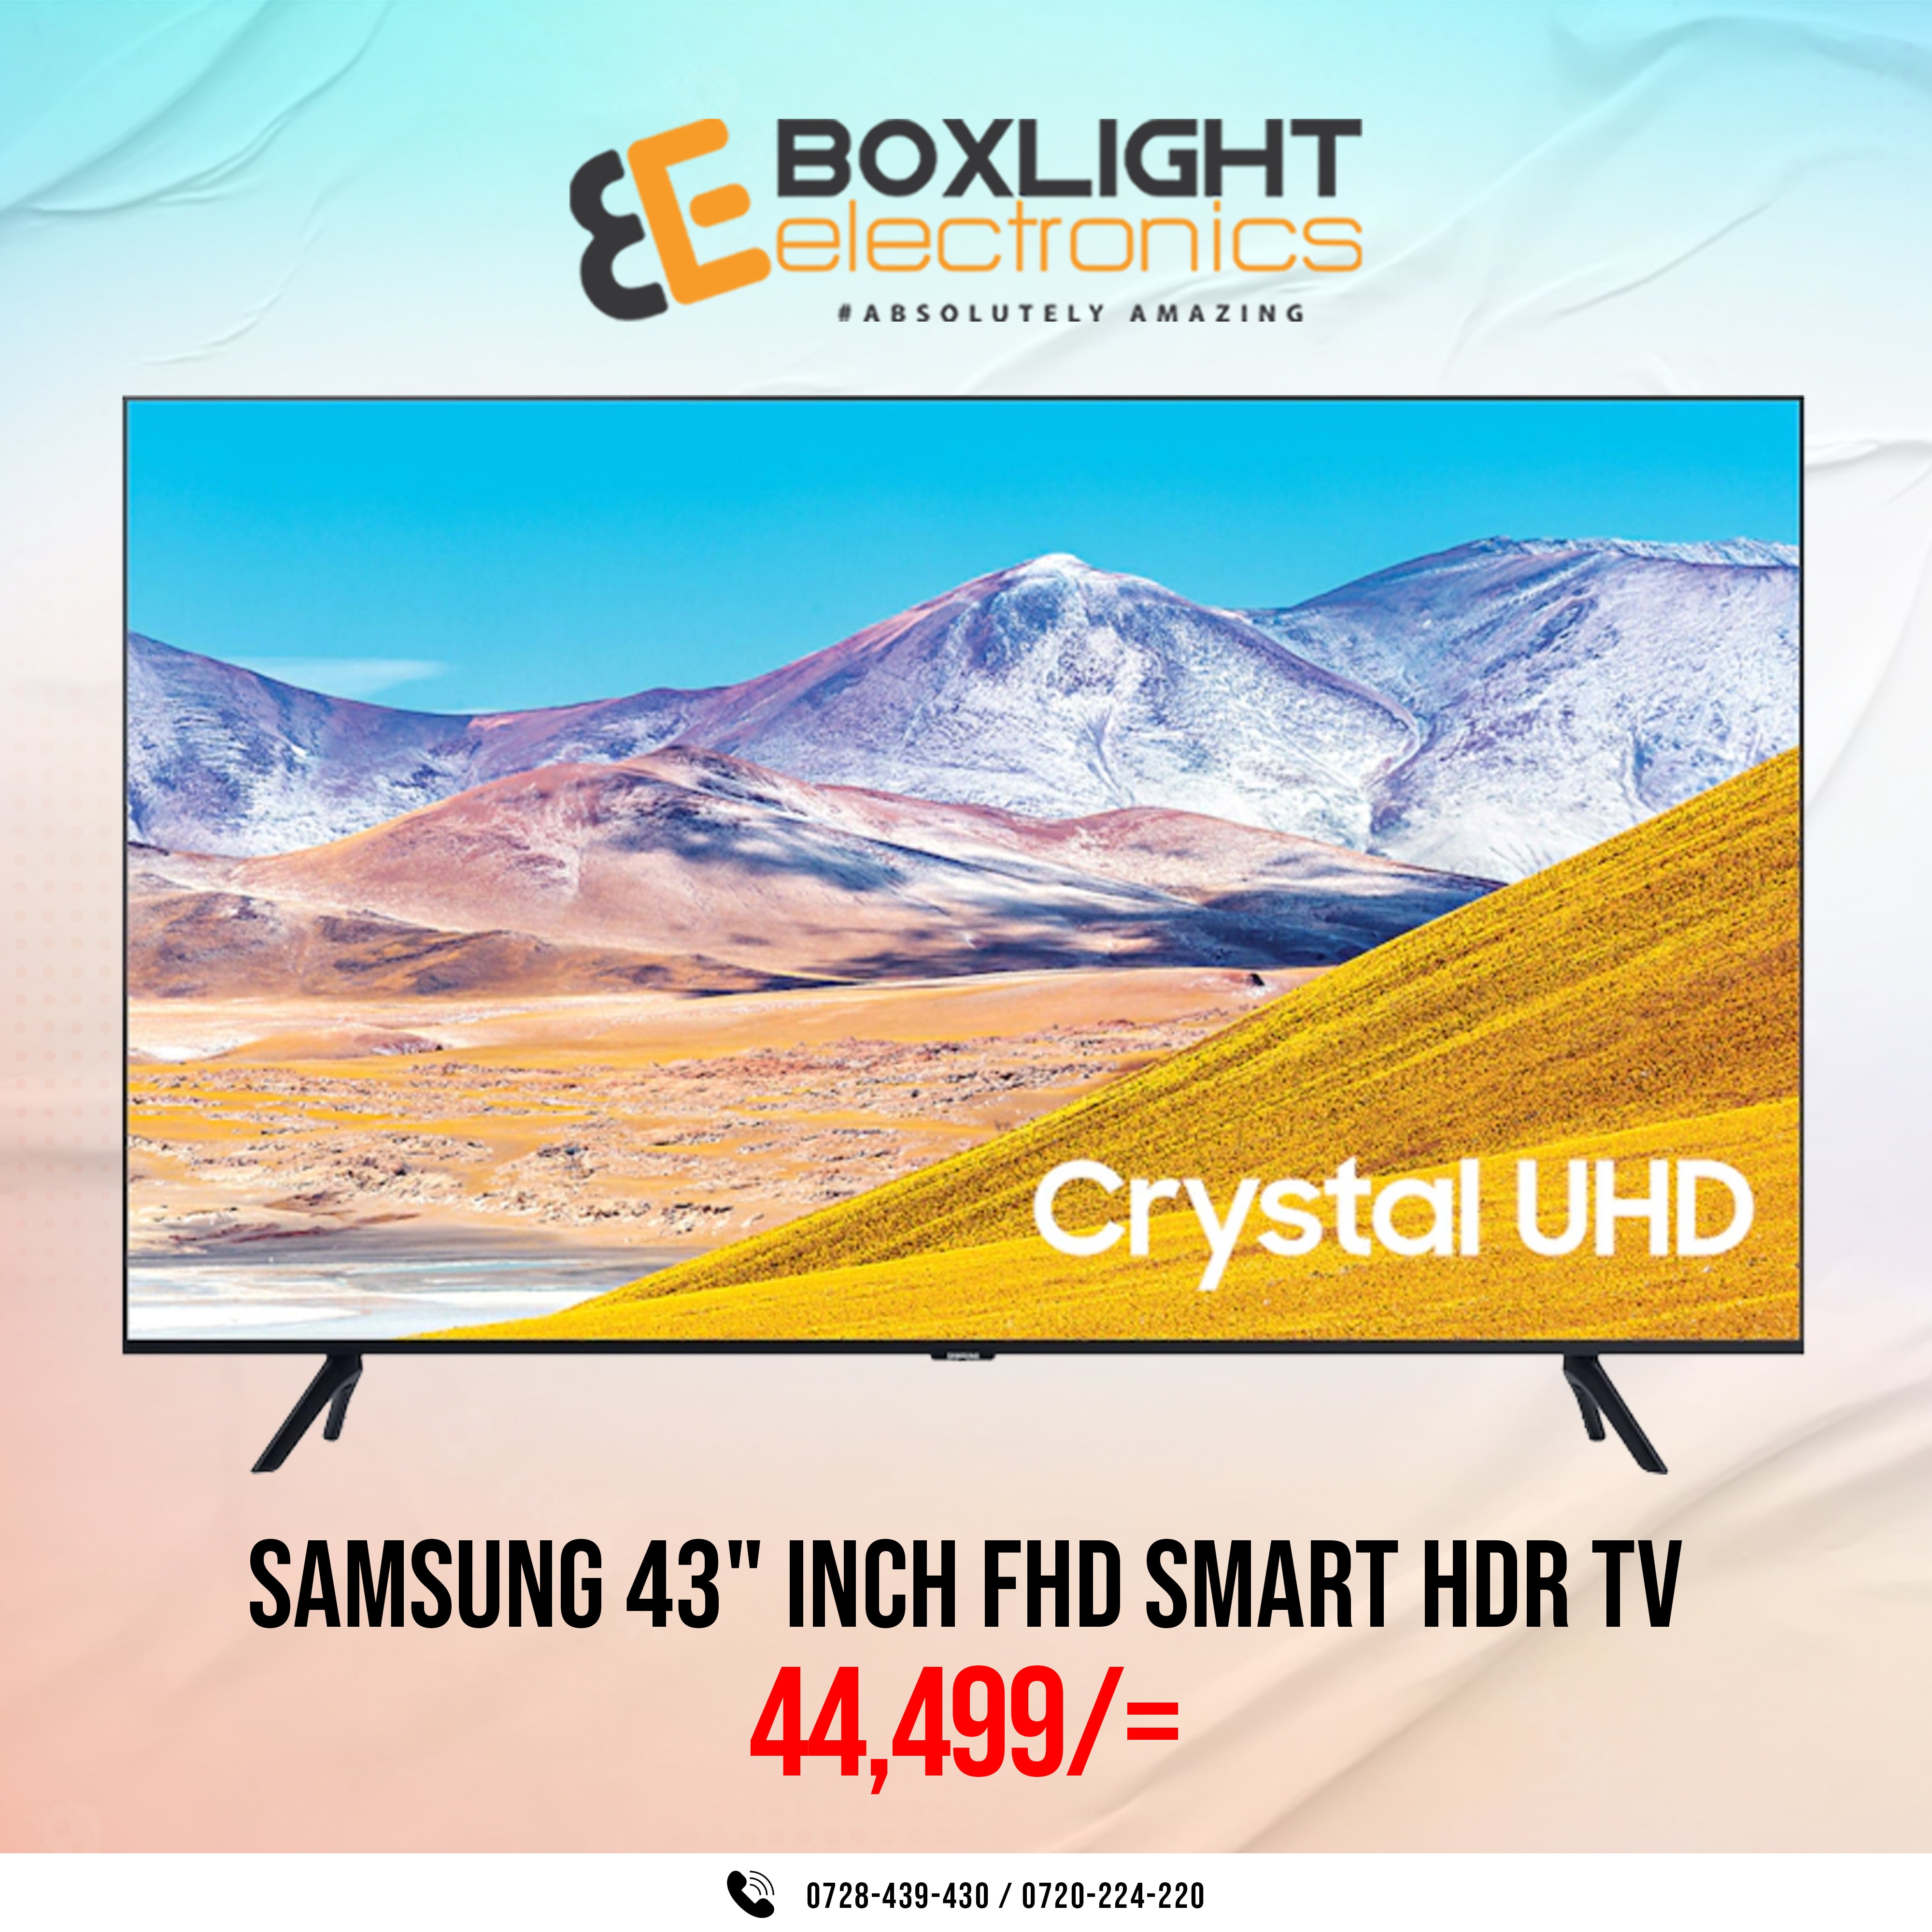 Samsung 43" Inch FHD Smart HDR TV (43T5300)